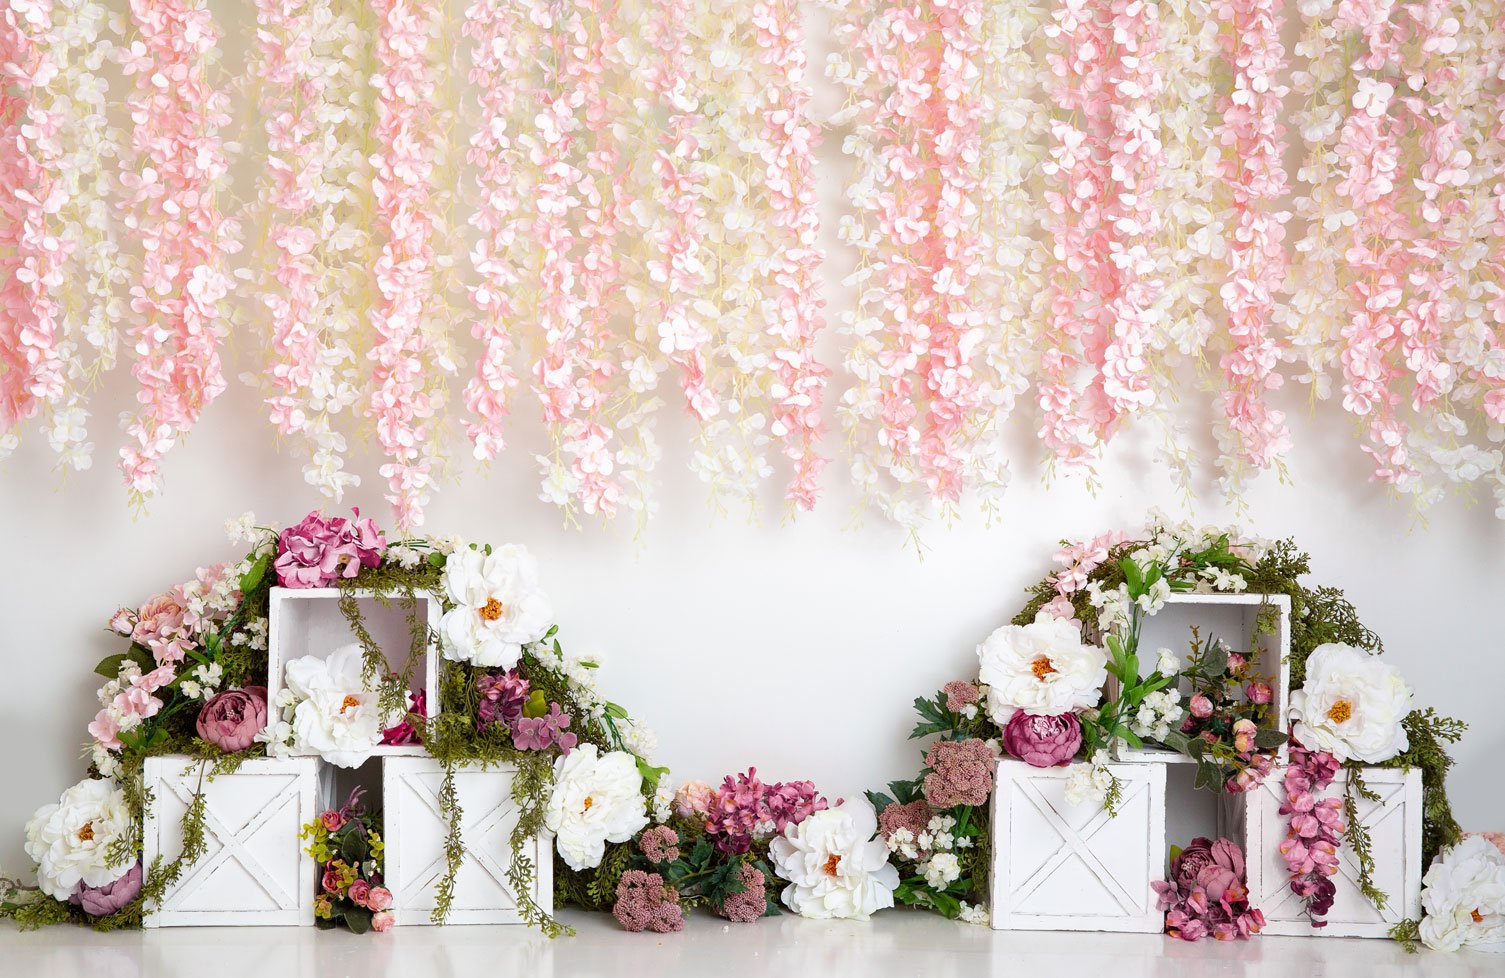 Kate Spring Florals Flower Wall Wedding Backdrop Designed By Megan Lei